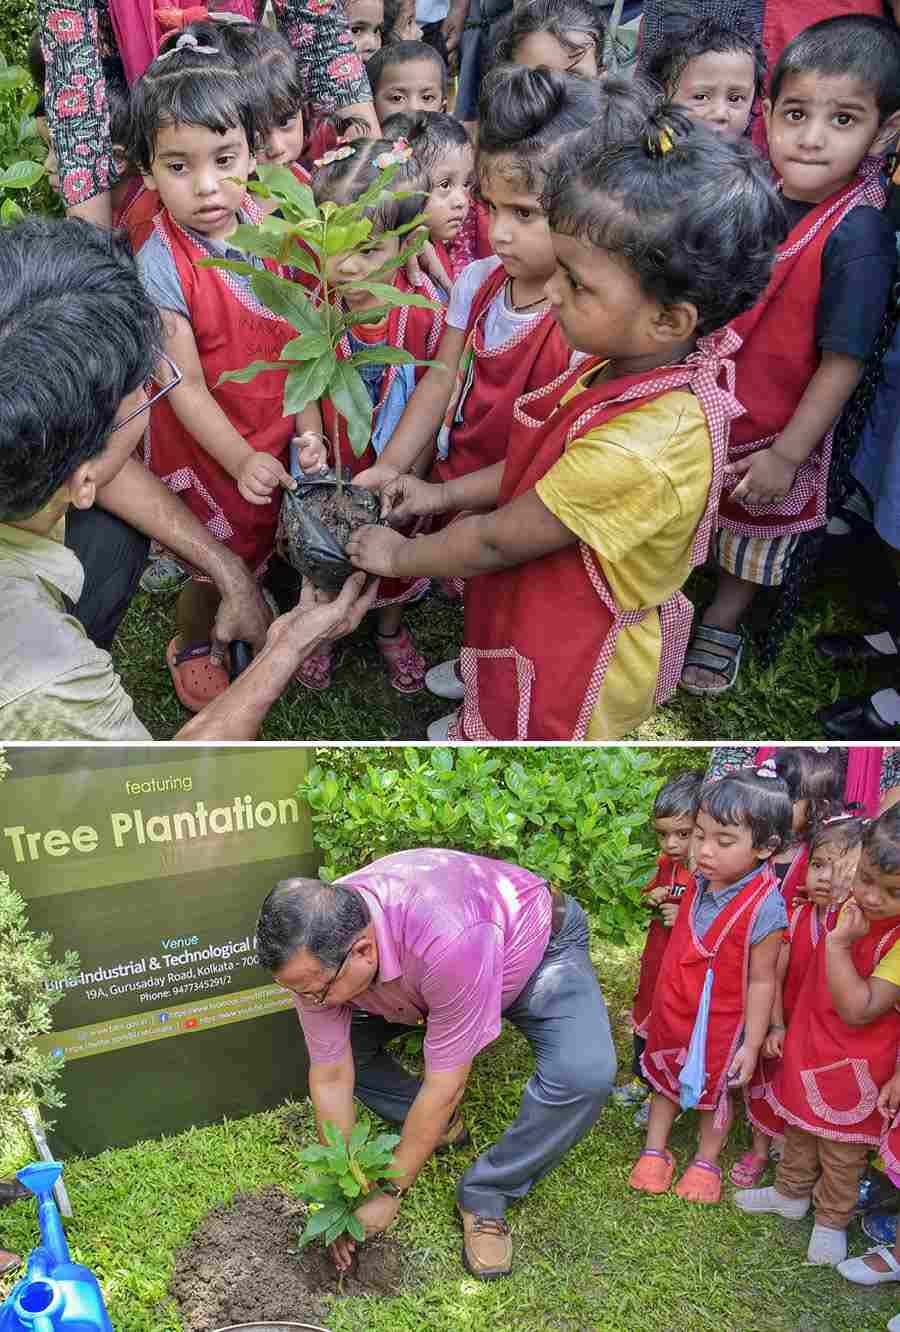 The International Day for the Conservation of the Mangrove Ecosystem was observed by the Birla Industrial and Technological Museum in collaboration with Mother Earth Foundation. A tree plantation drive was conducted along with students from Mahadevi Birla Shishu Vihar and G.D.Birla Centre for Education. Birla Industrial & Technological Museum (BITM) in Kolkata, the first science museum in the country under the National Council of Science Museums (NCSM), Ministry of Culture, Govt. of India, is engaged in popularising and promoting science especially among the youth through various interactive models, exhibitions, educational programmes and activities throughout the year